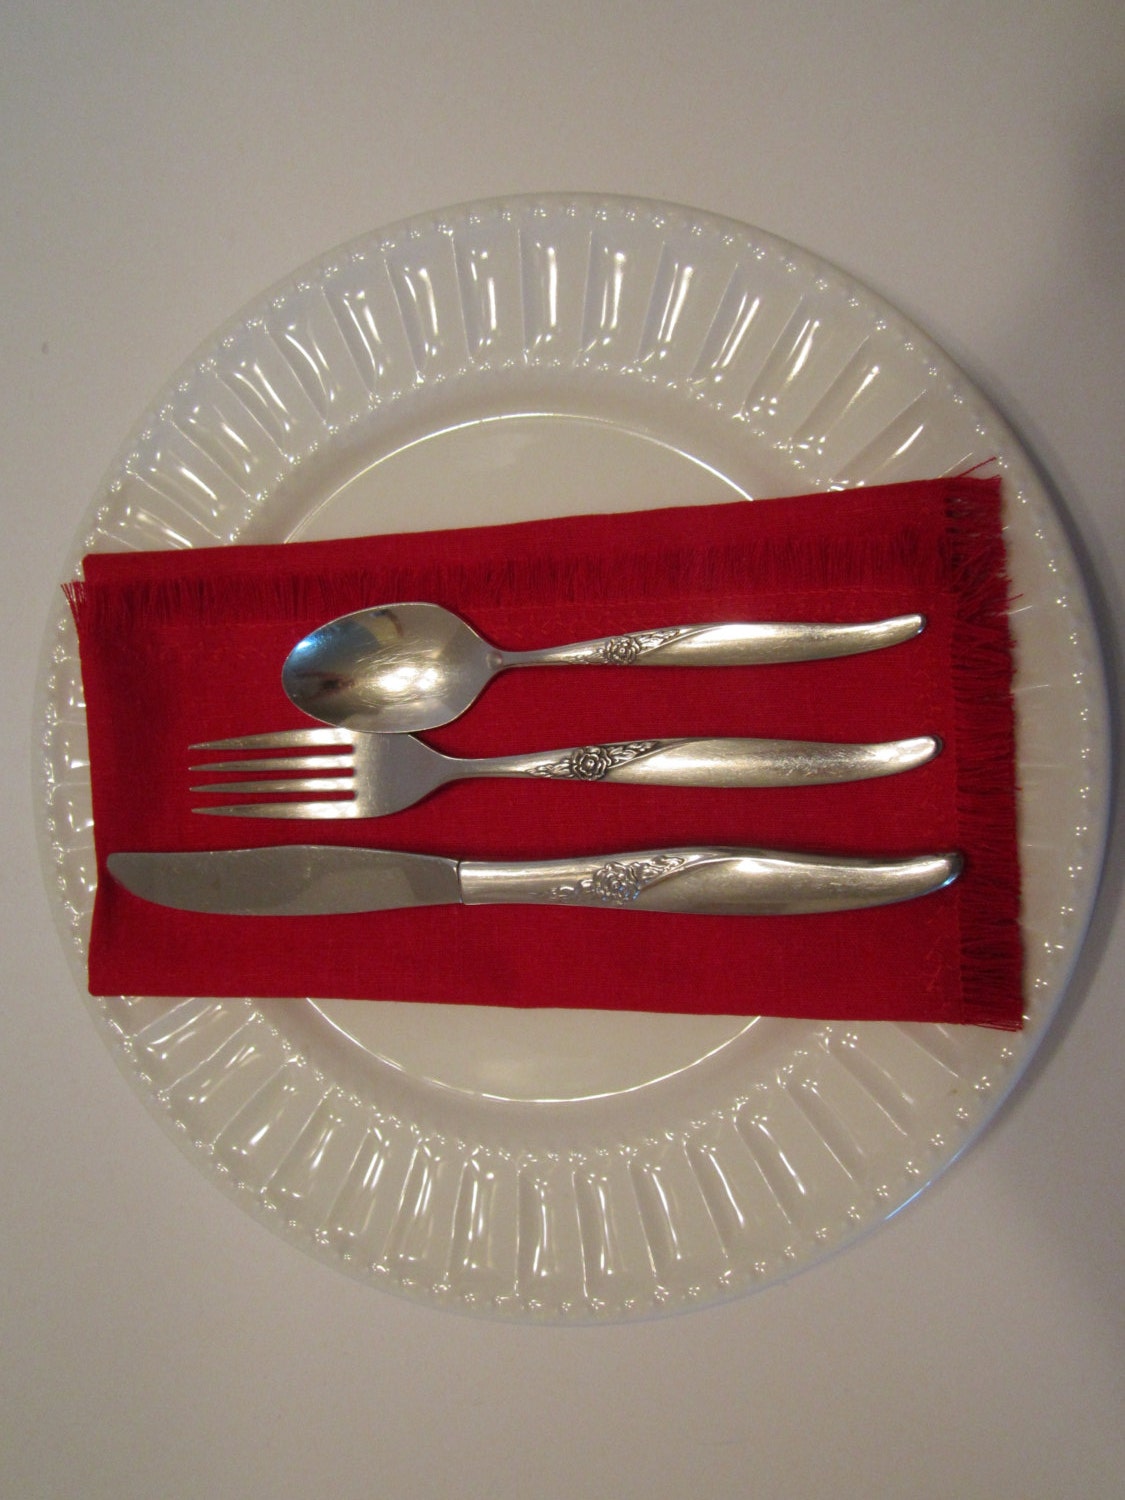 Linen Blend Fabric Napkins With Fringed Edges - Red Lunch/Dinner Napkins/Placemats Eco Friendly